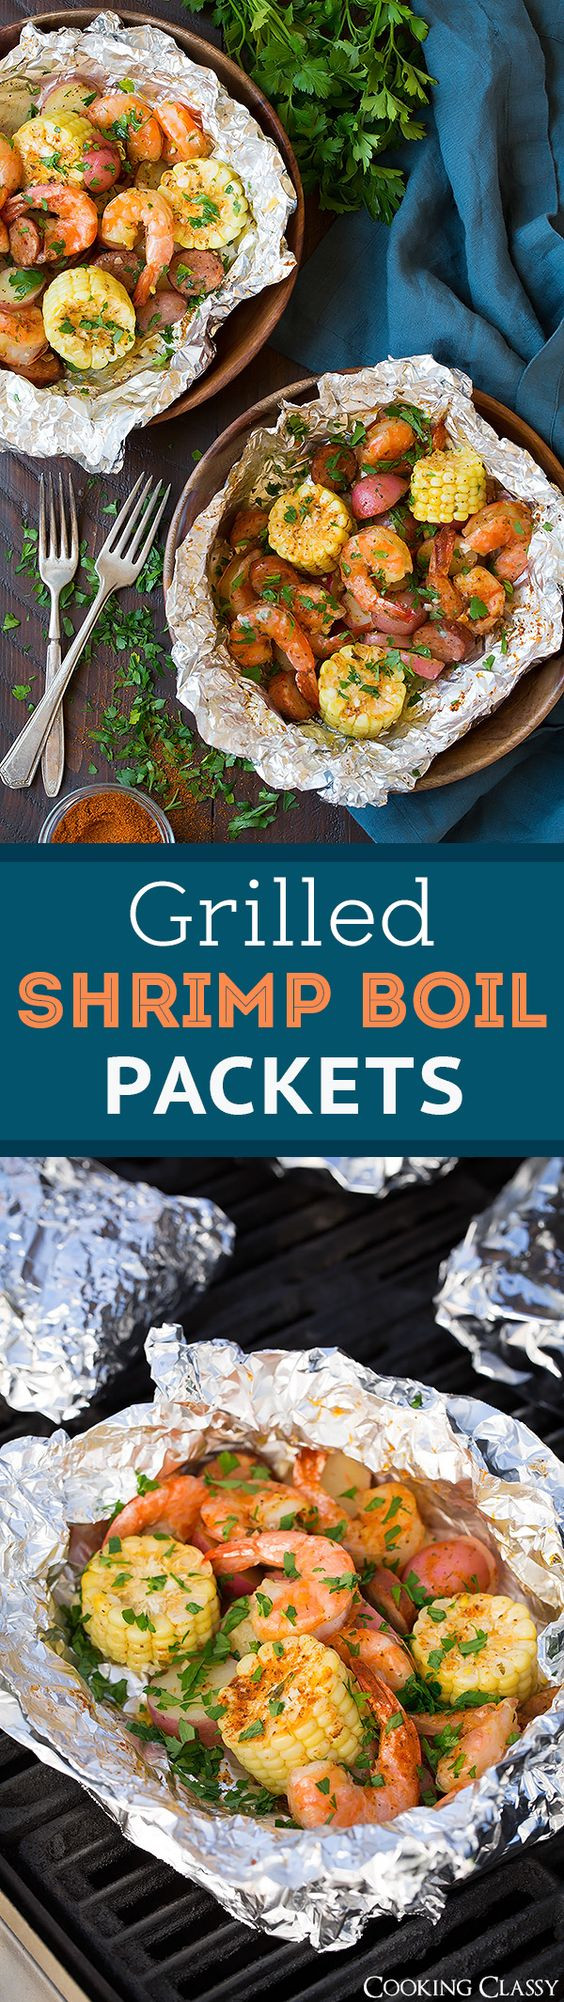 Summer Dinners On The Grill
 Easy Tin Foil Packets Suppers Recipes – Baked or Grilled